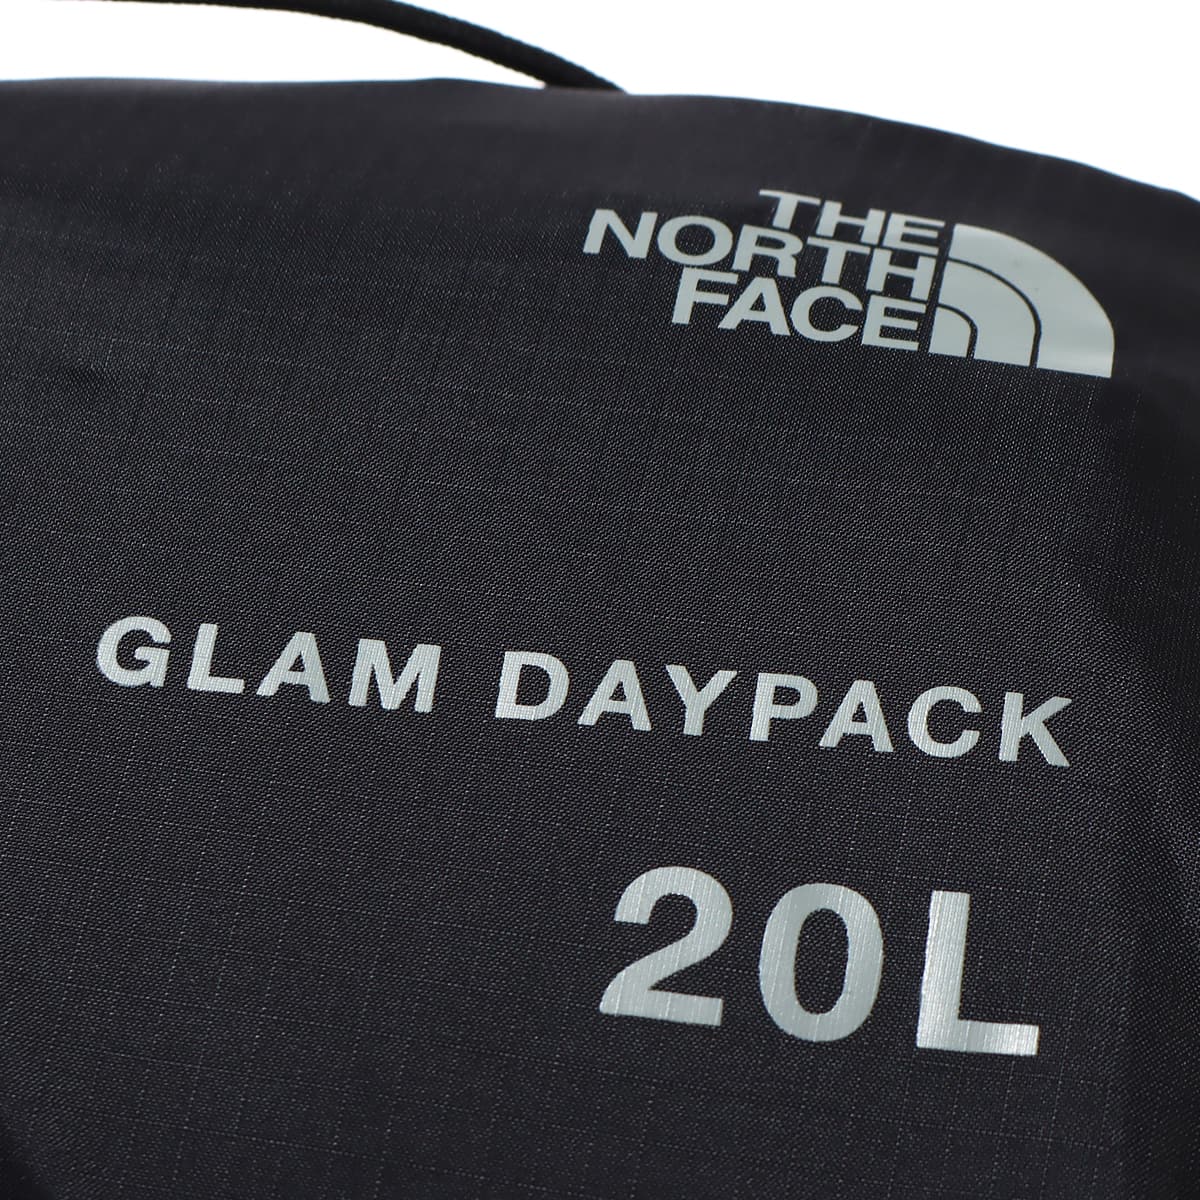 THE NORTH FACE GLAM DAYPACK BLACK 23SS-I